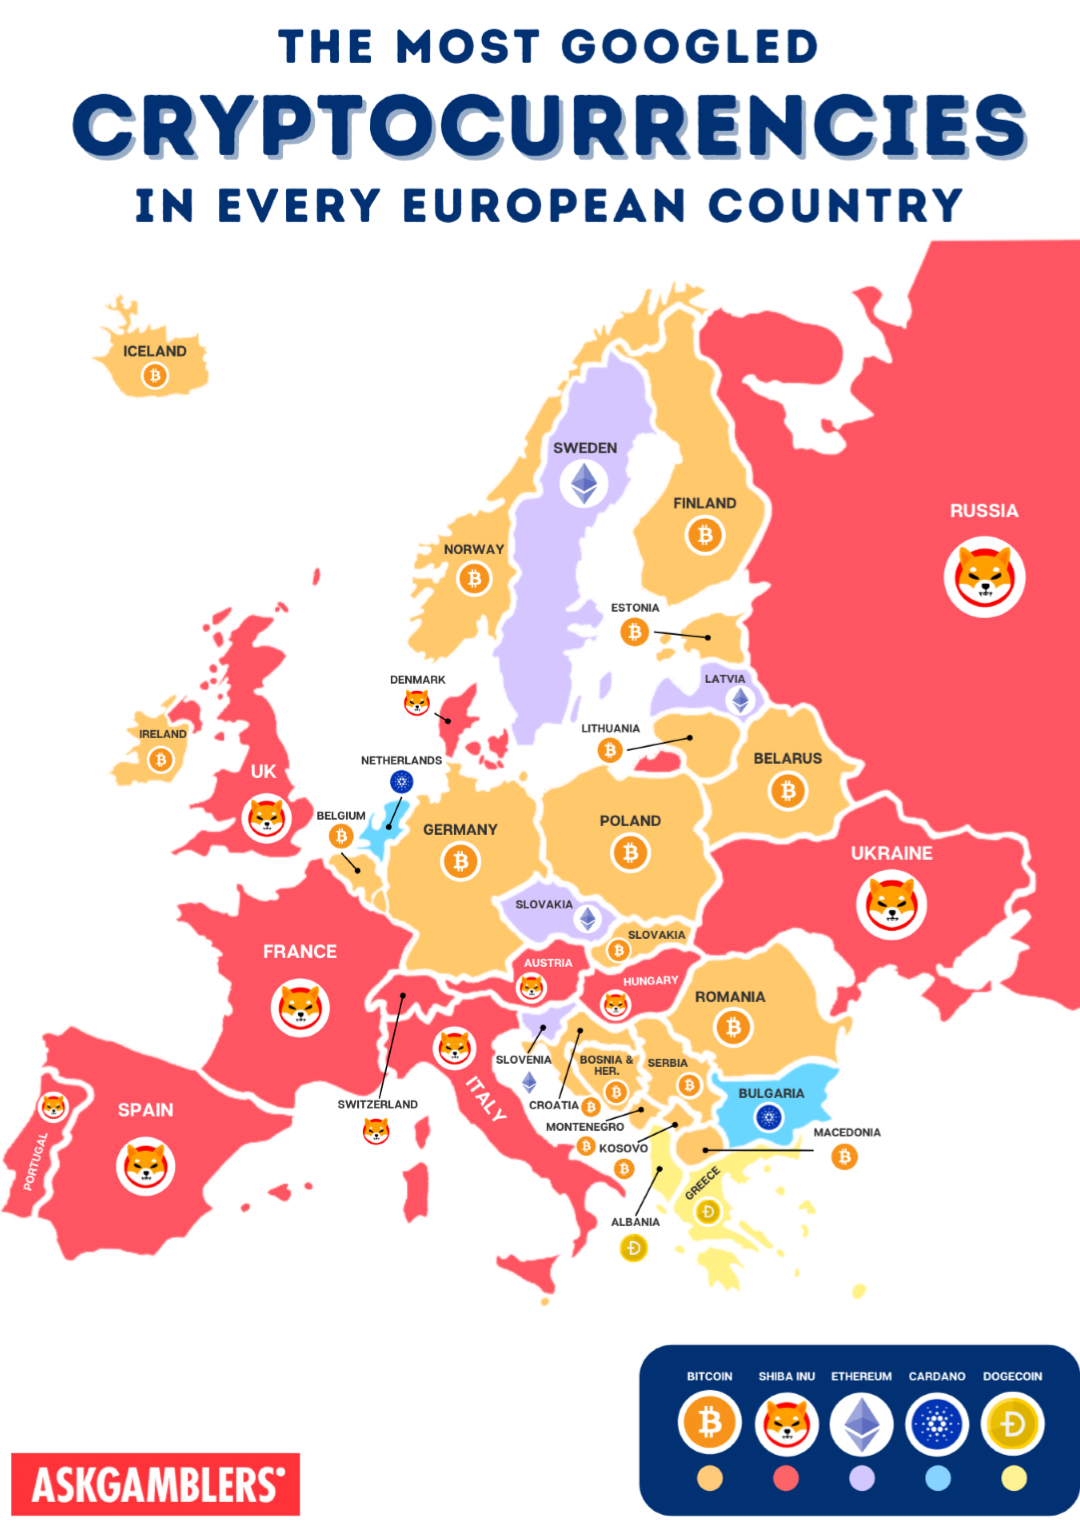 These Are The Most Googled Cryptocurrencies in Every European Country